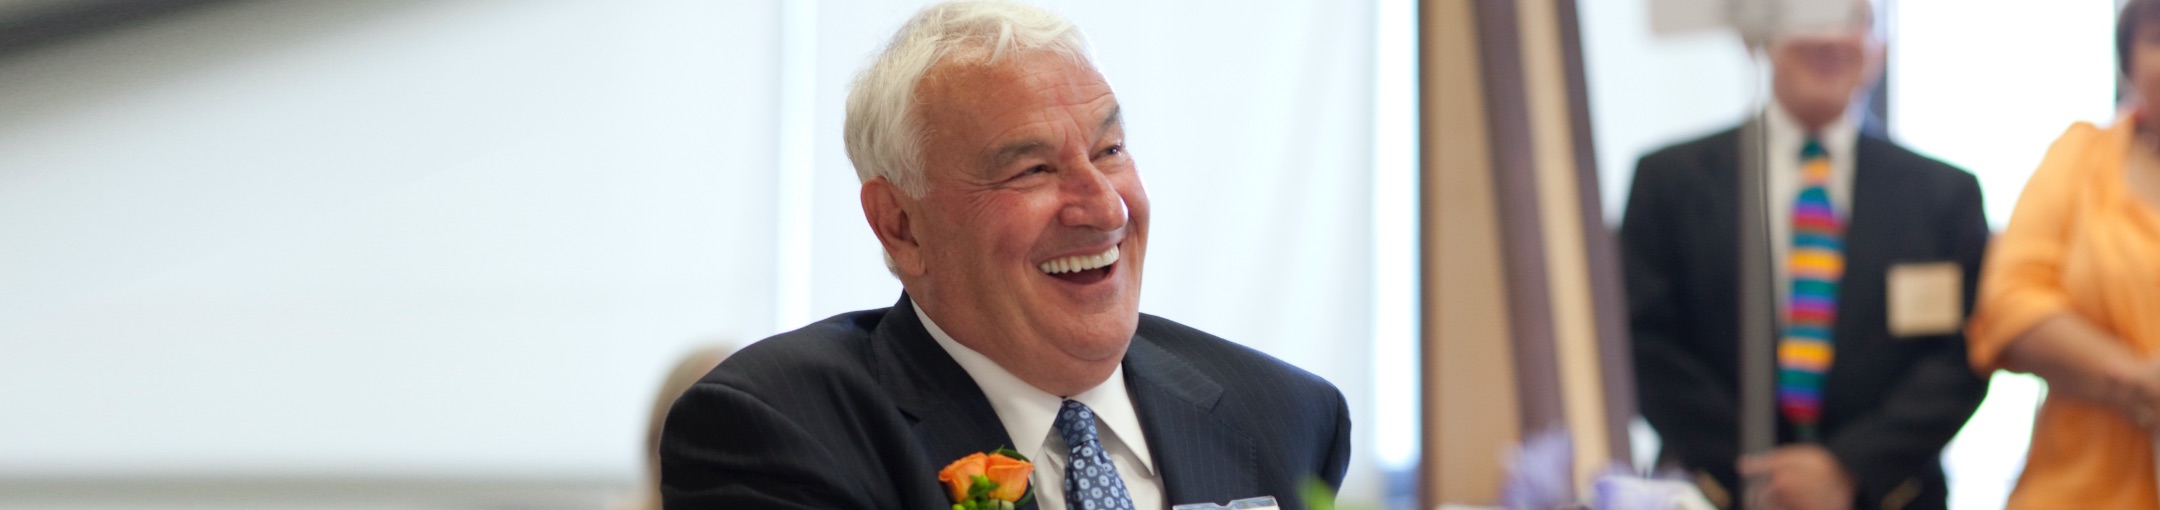 Tom golisano laughing while sitting in a suit